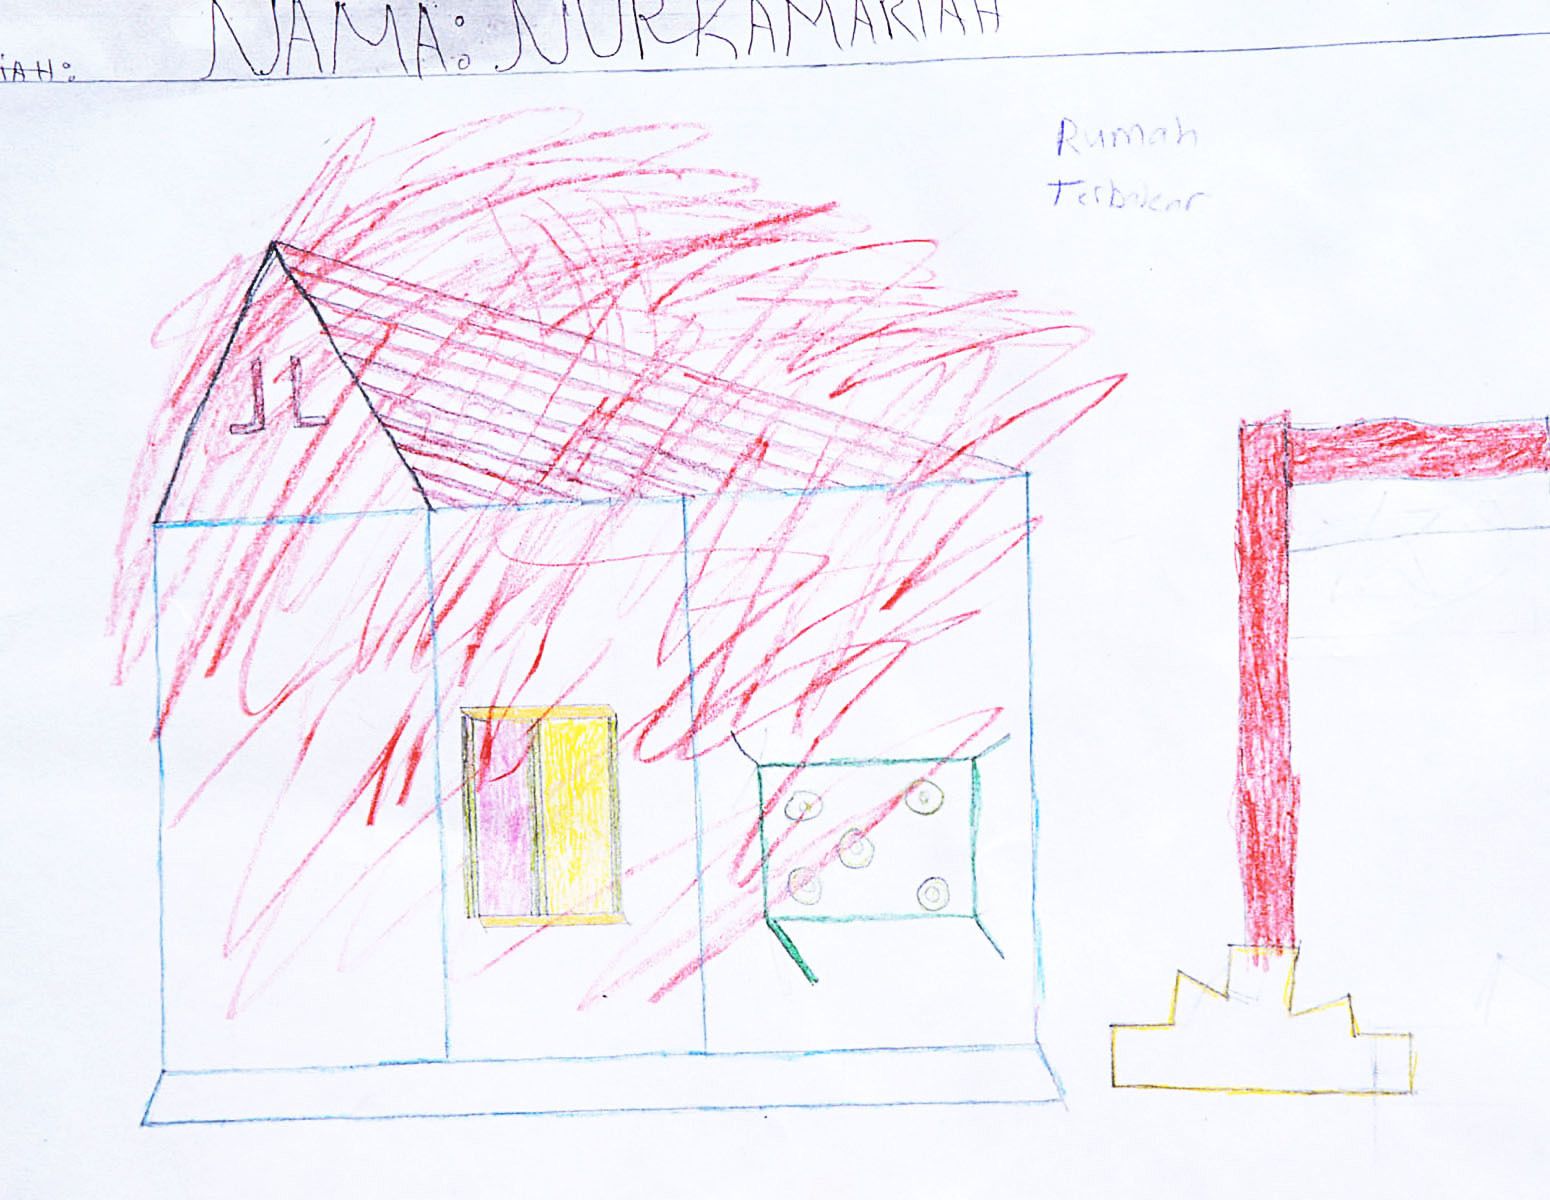 Drawn by a young boy living in a refugee camp.He painted what he saw in his village.